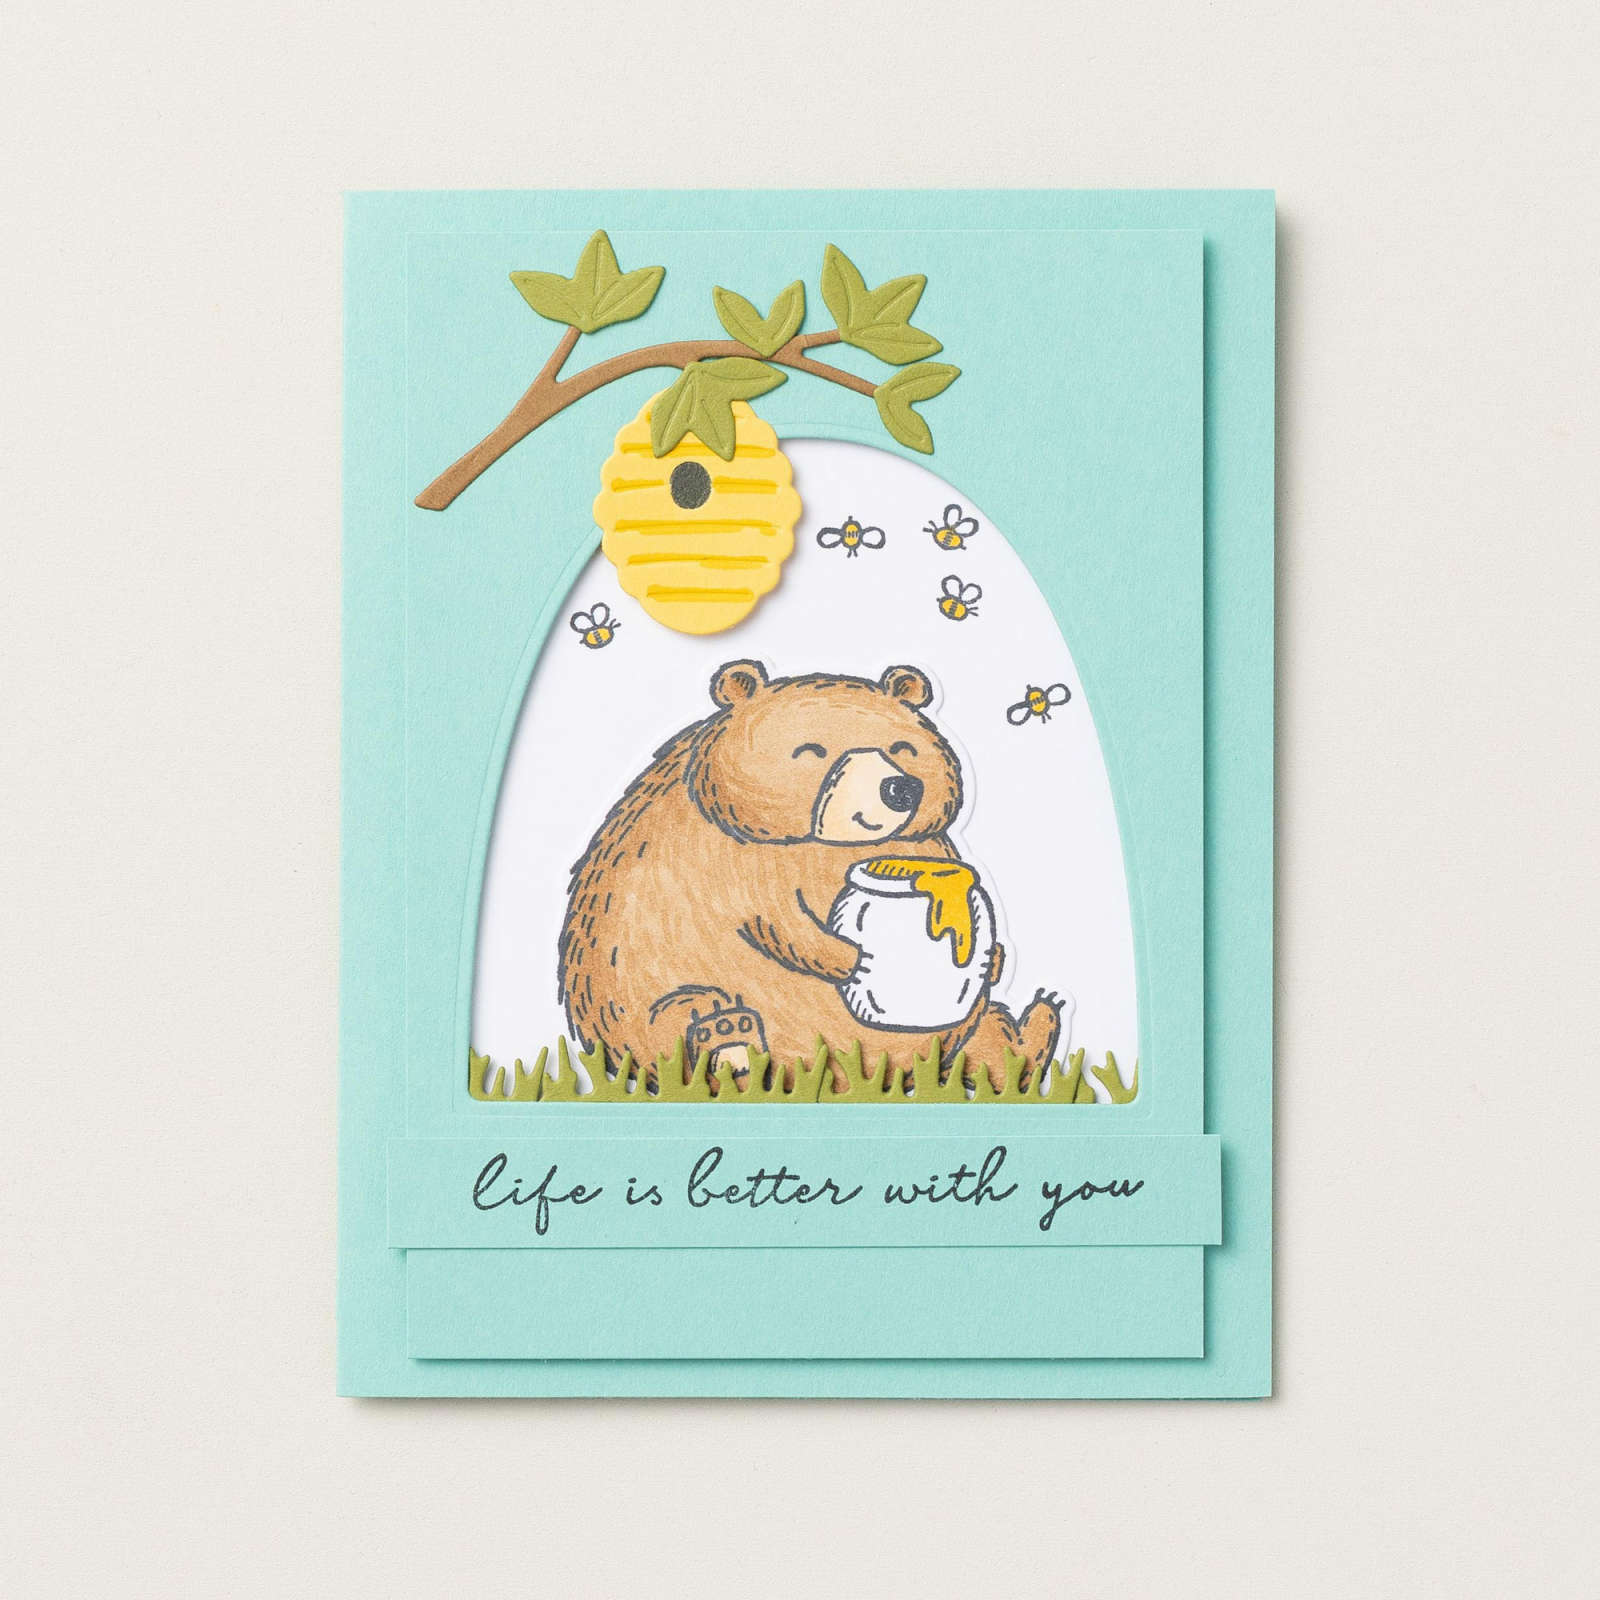 Fluff Off Angry Cat Stationery Cards by lovewithfluff